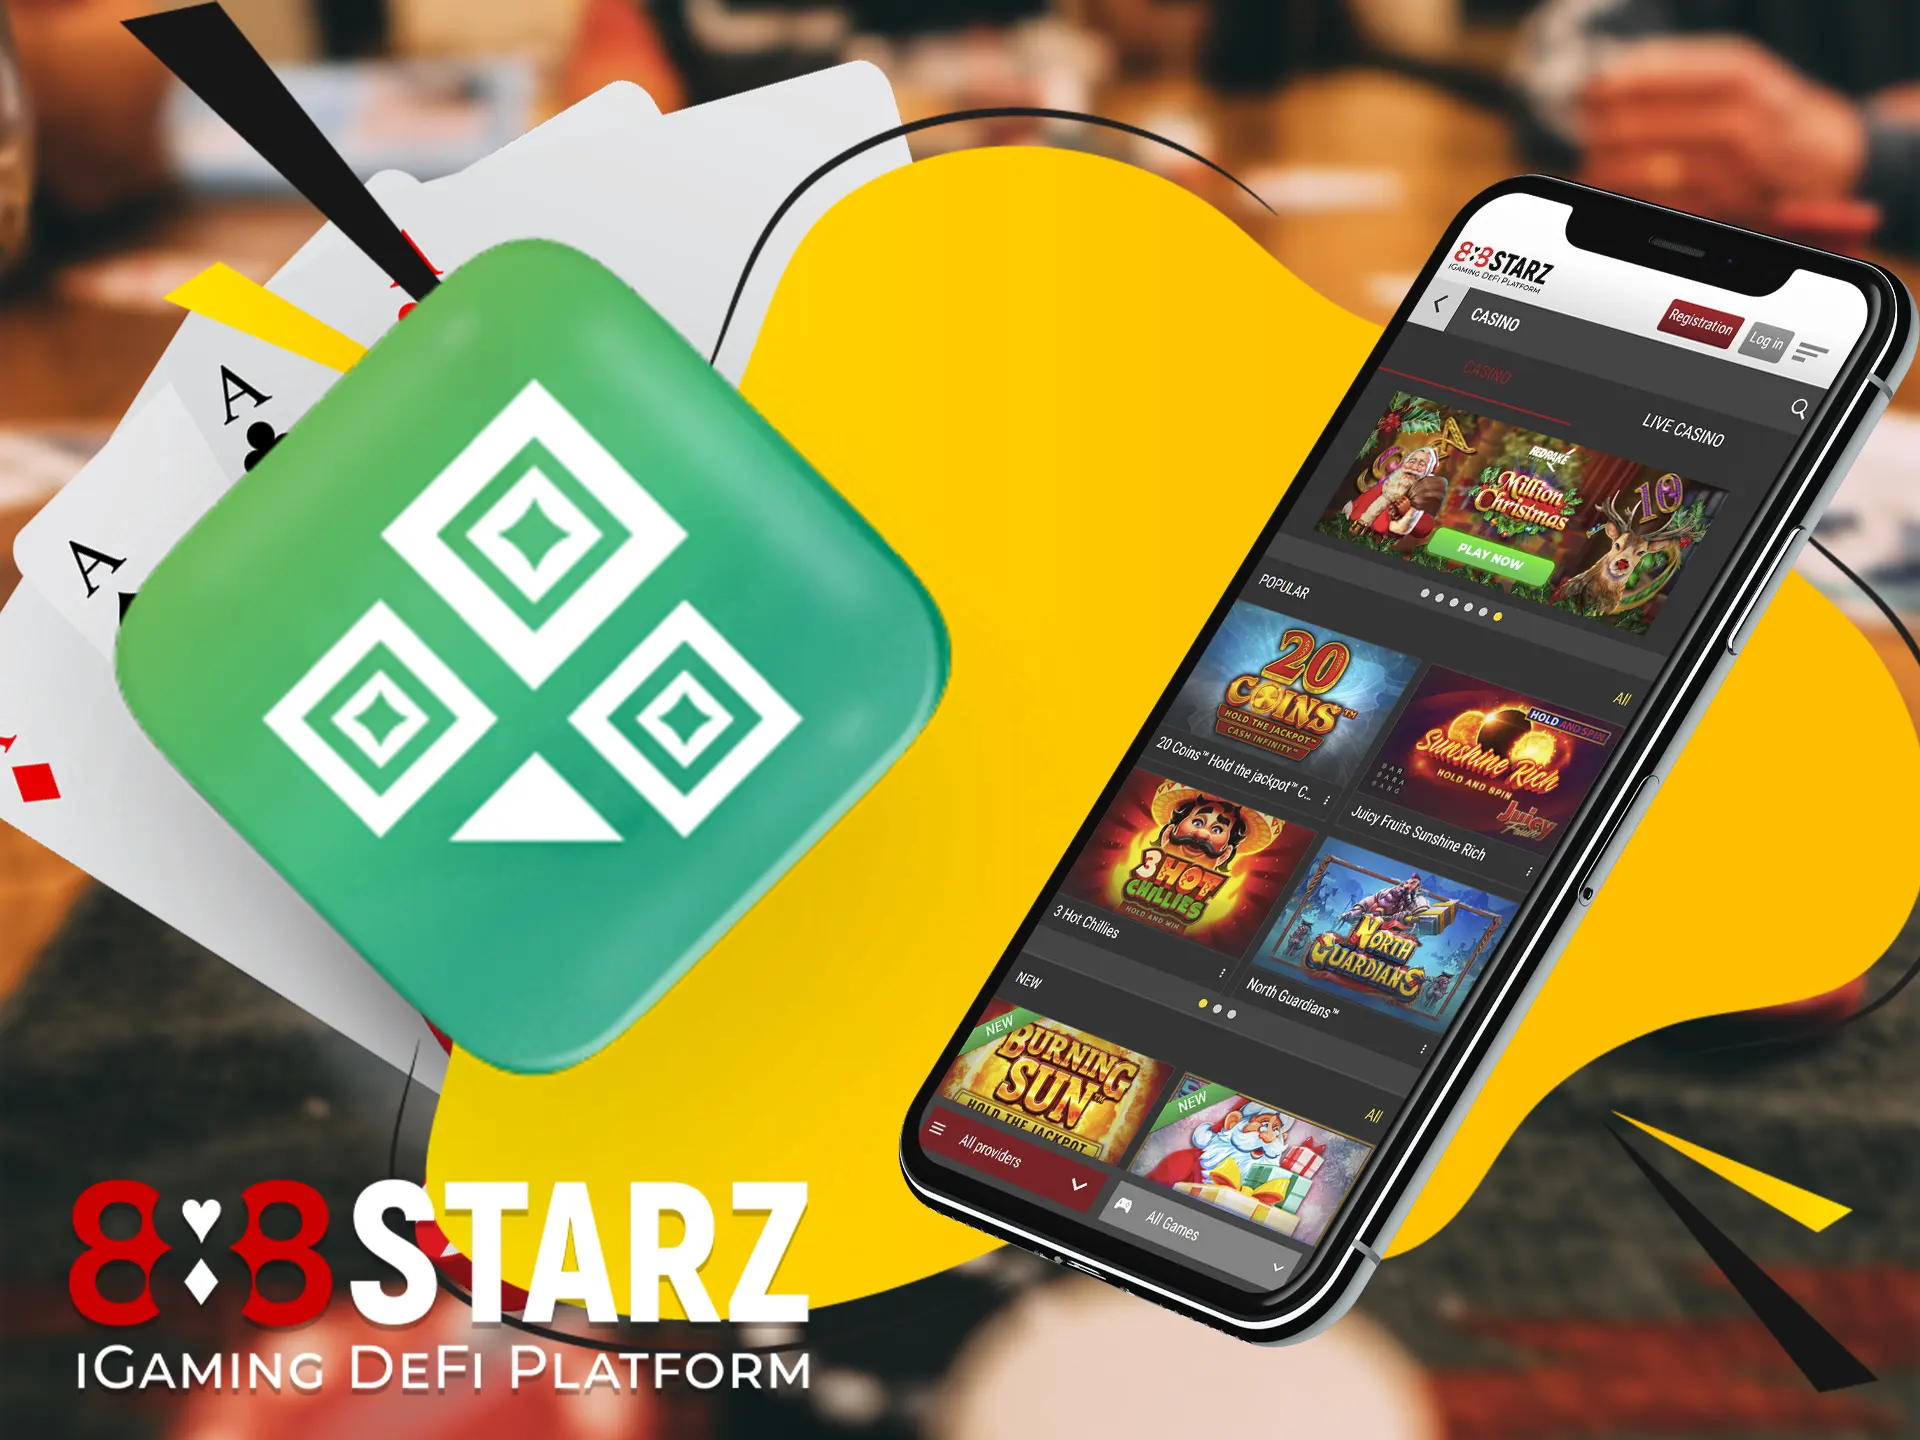 This provider is dedicated to a variety of slots as well as other entertainment at 888starz.